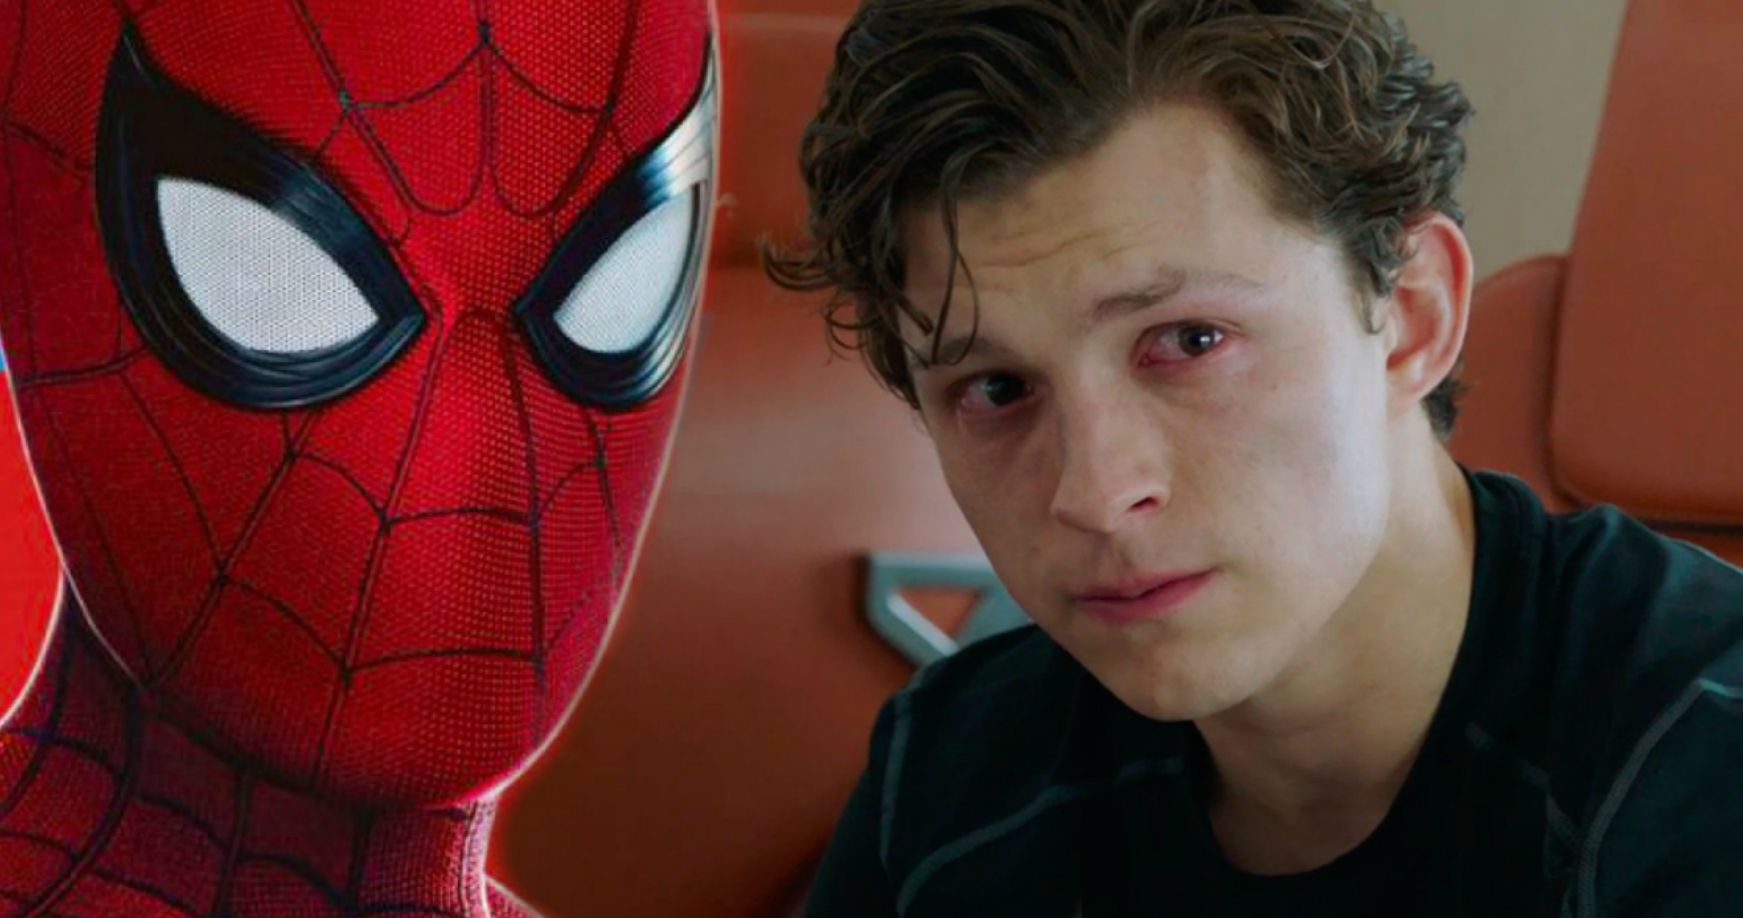 #SaveSpidey Is Trending Worldwide, Is There Hope for Spider-Man &amp; the MCU?